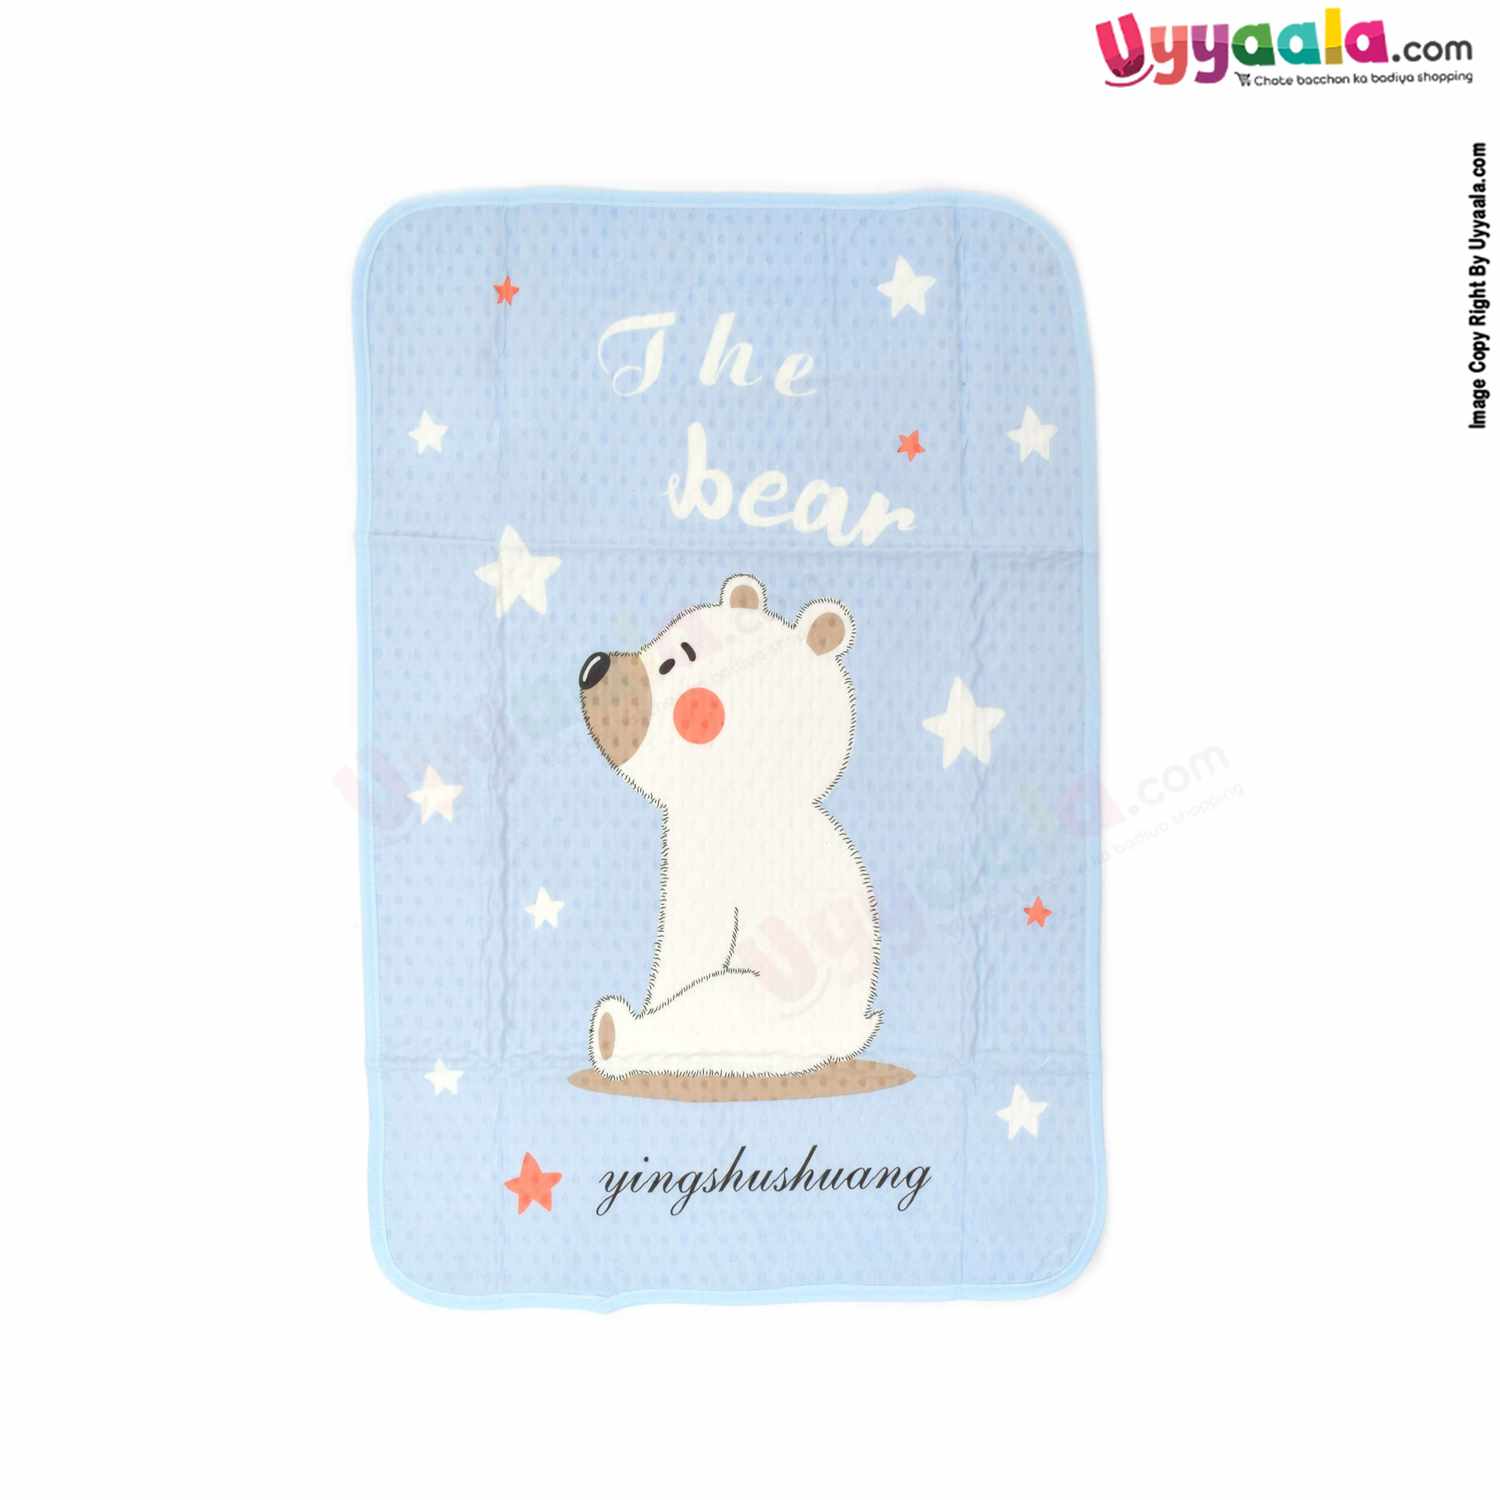 Fancy Premium Baby Mattress Protector Dry Sheet Water Proof, One Side Cotton & Another Side PVC for Babies with Baby Bear Print, Small Size(70*50cm)